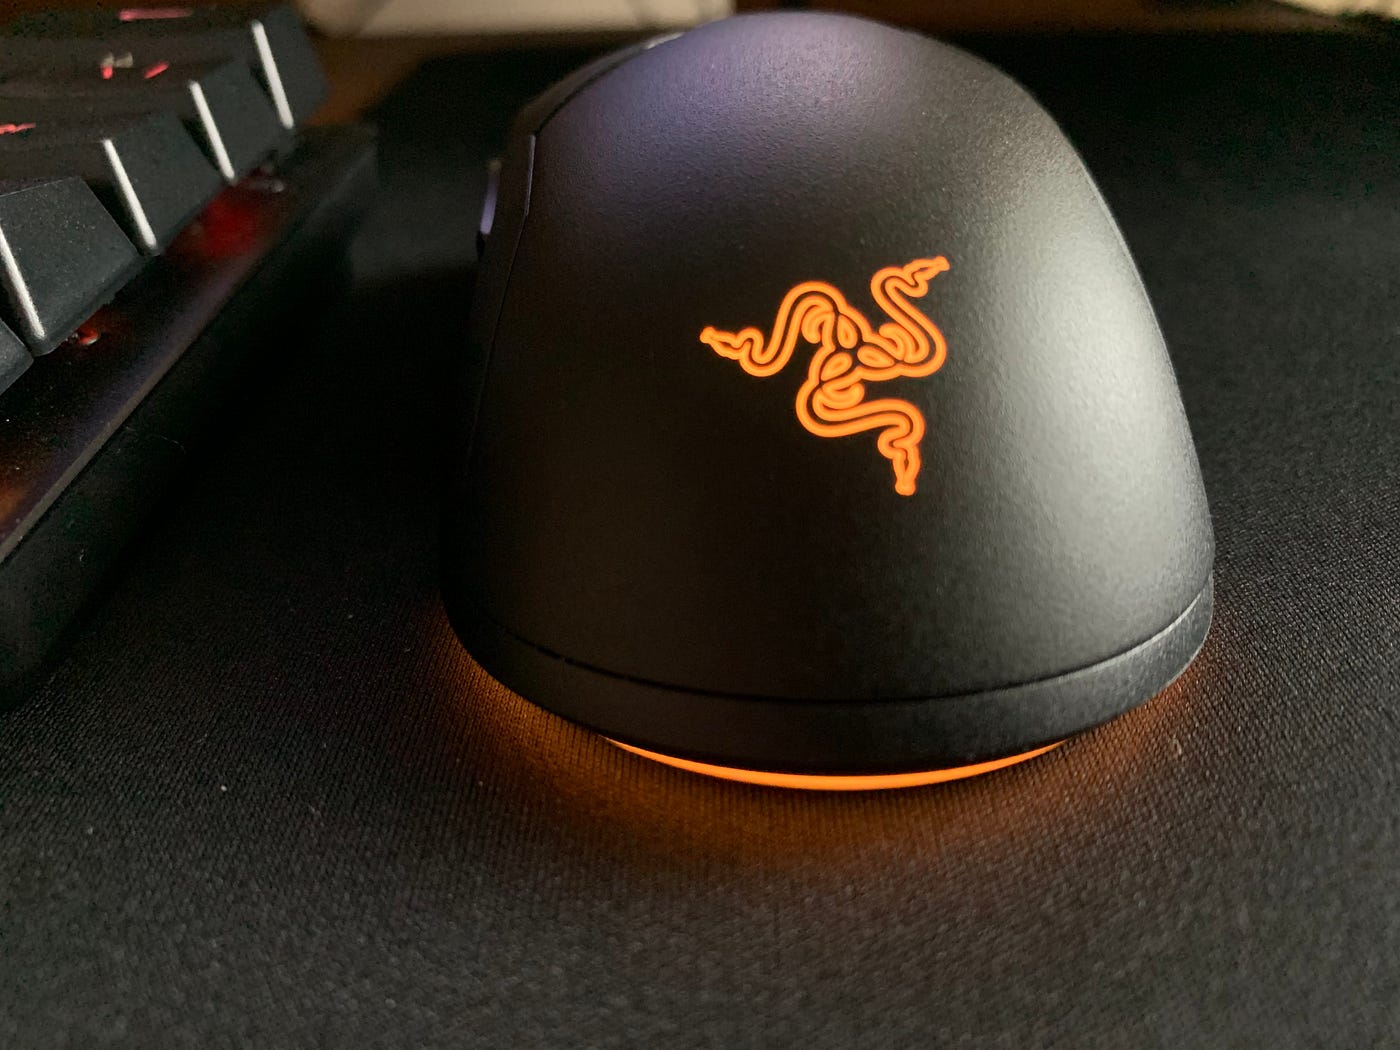 SteelSeries Rival 3 Wireless Budget Gaming Mouse Review, by Alex Rowe